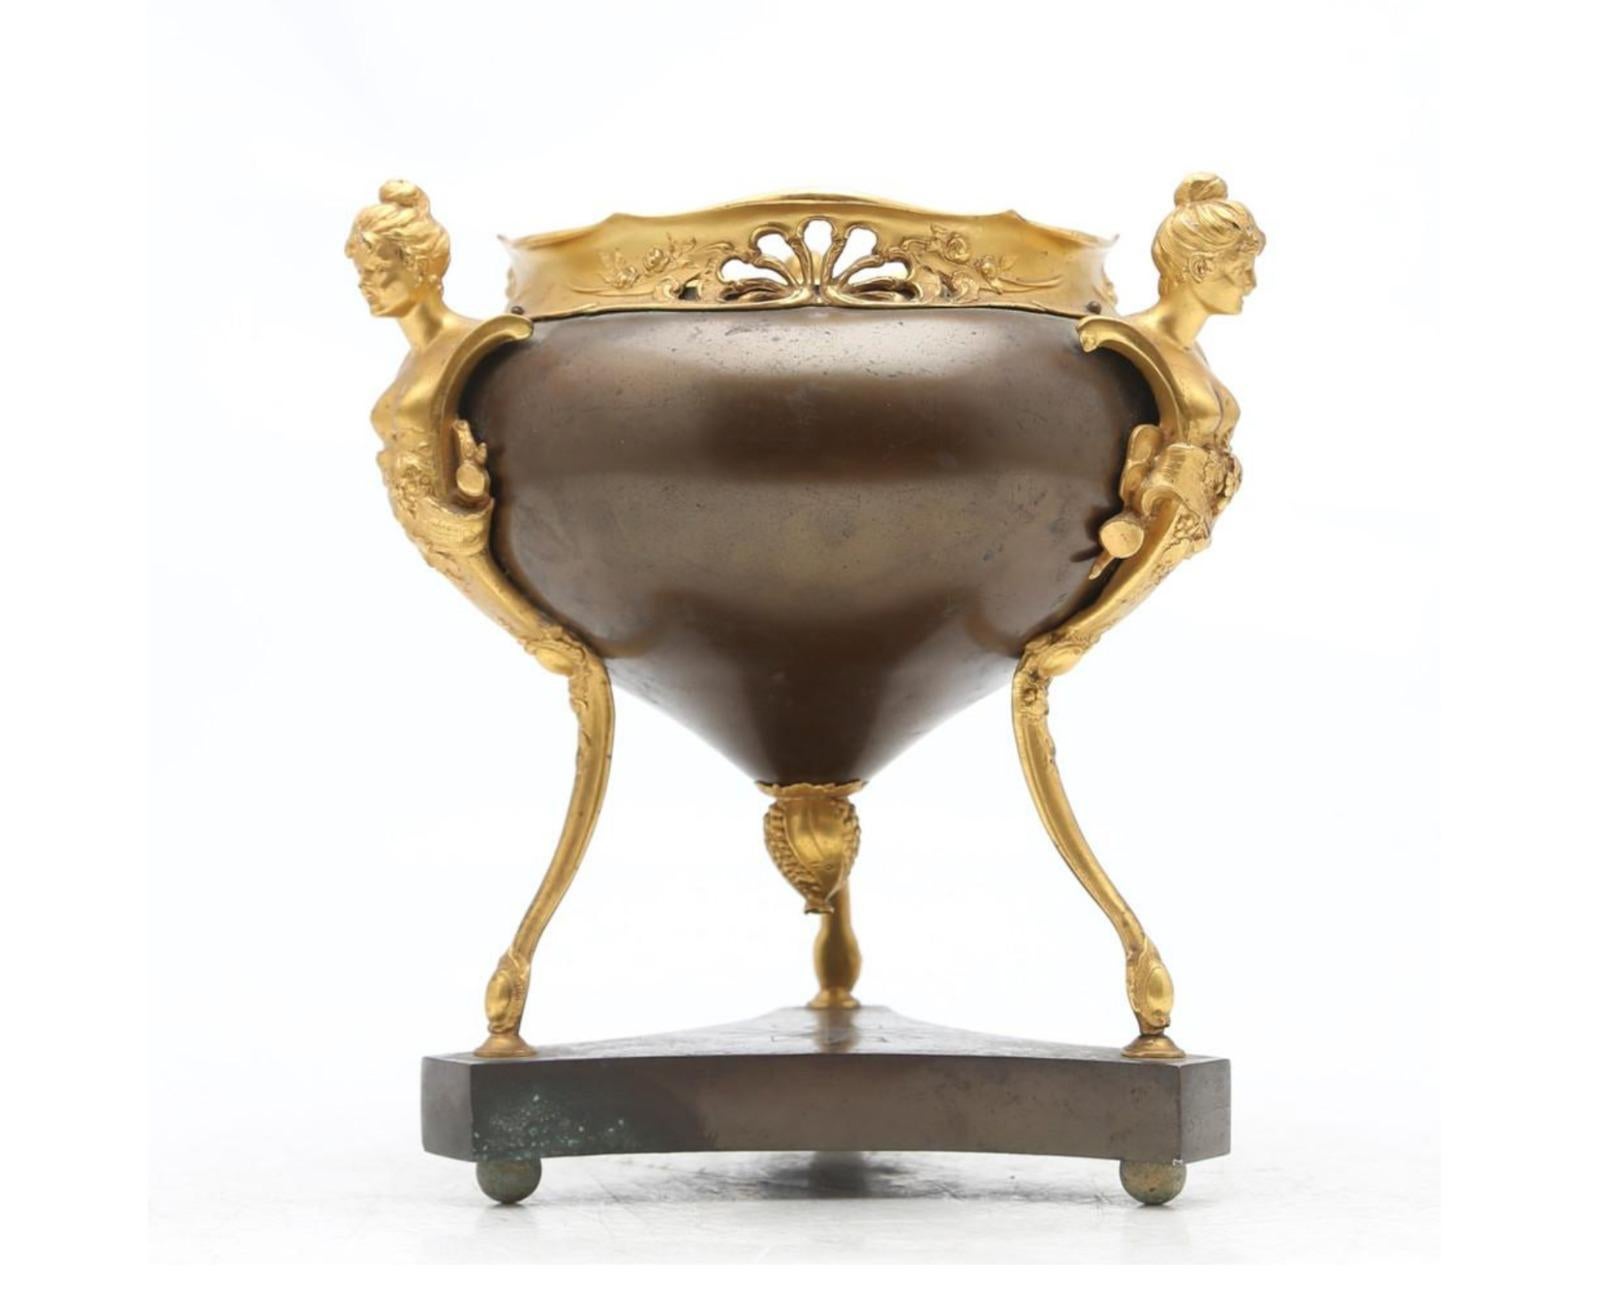 Belle Époque Centrepiece in Bronze early 20th century.
France
with 